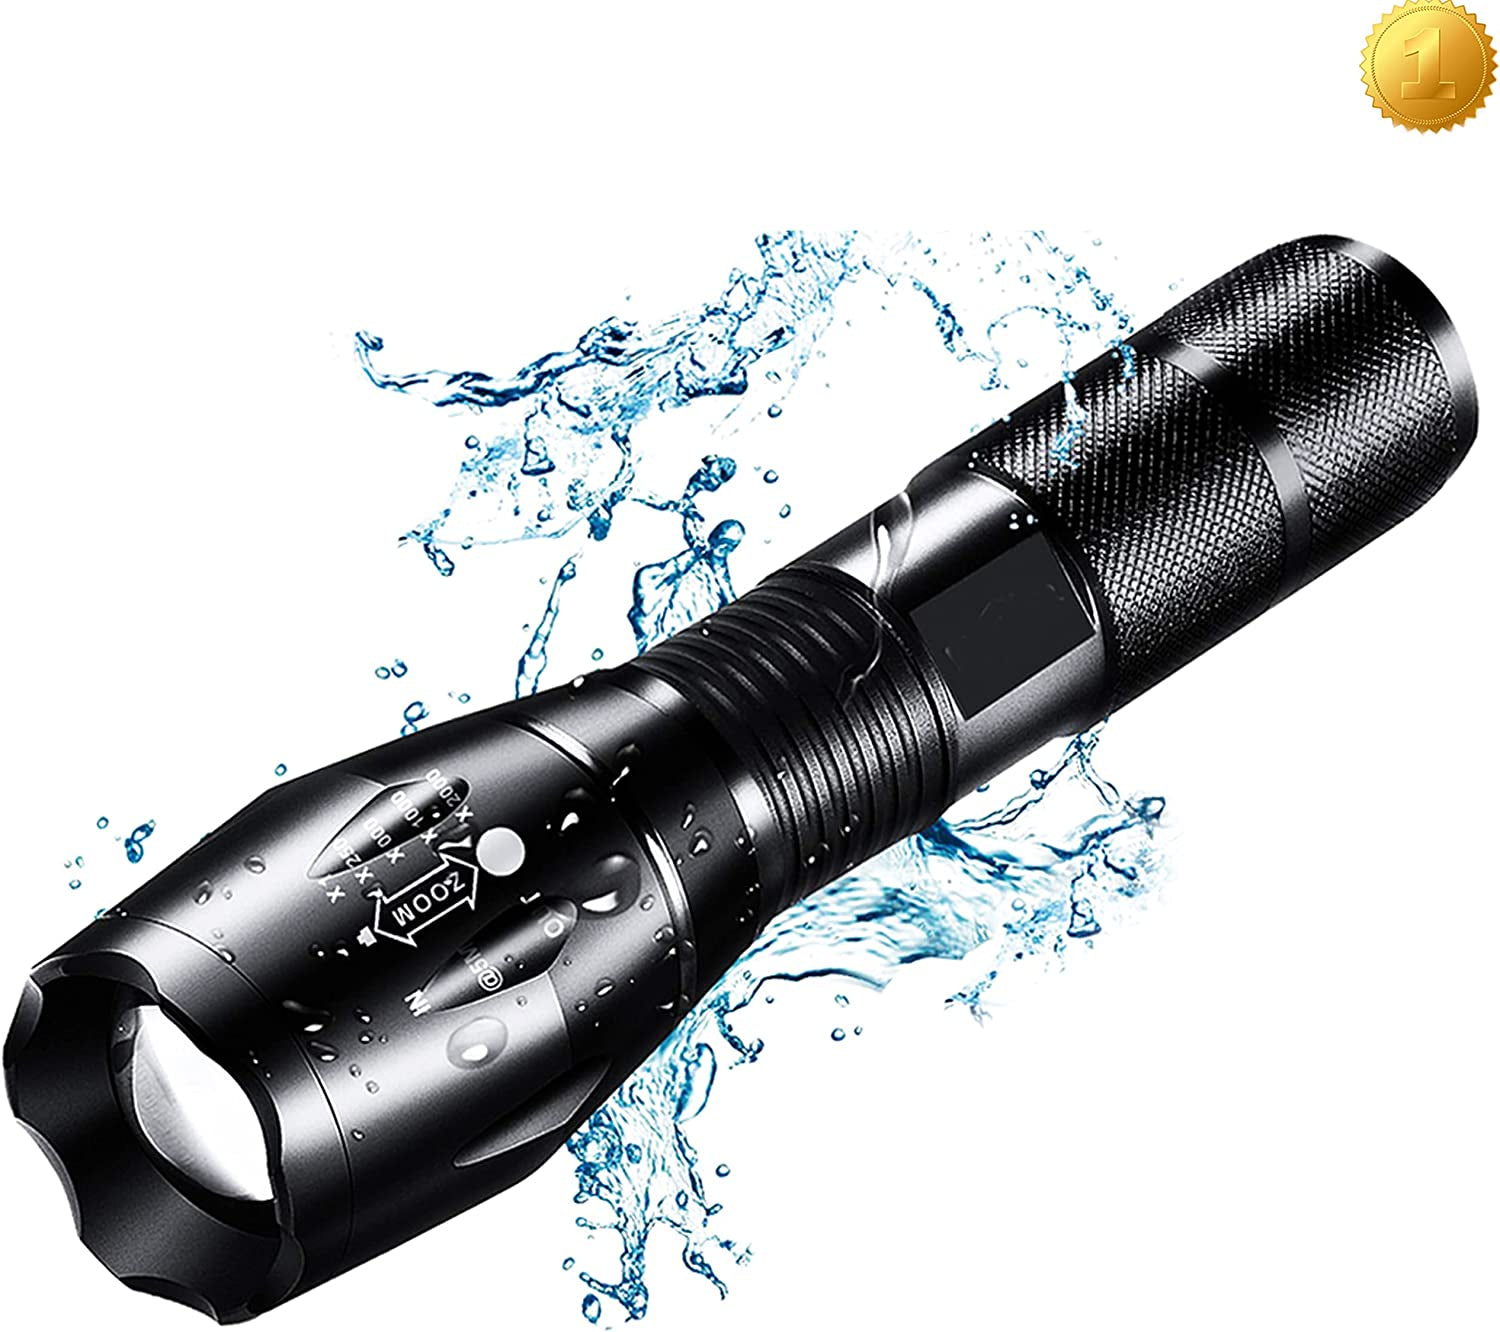 secretgreen.com.au, LED Torches High Lumens Flashlights Tactical Flashlight with Adjustable Focus a Water Resistant Torch for Outdoor, Emergency, Power Outage, Camping, Hiking (Black)